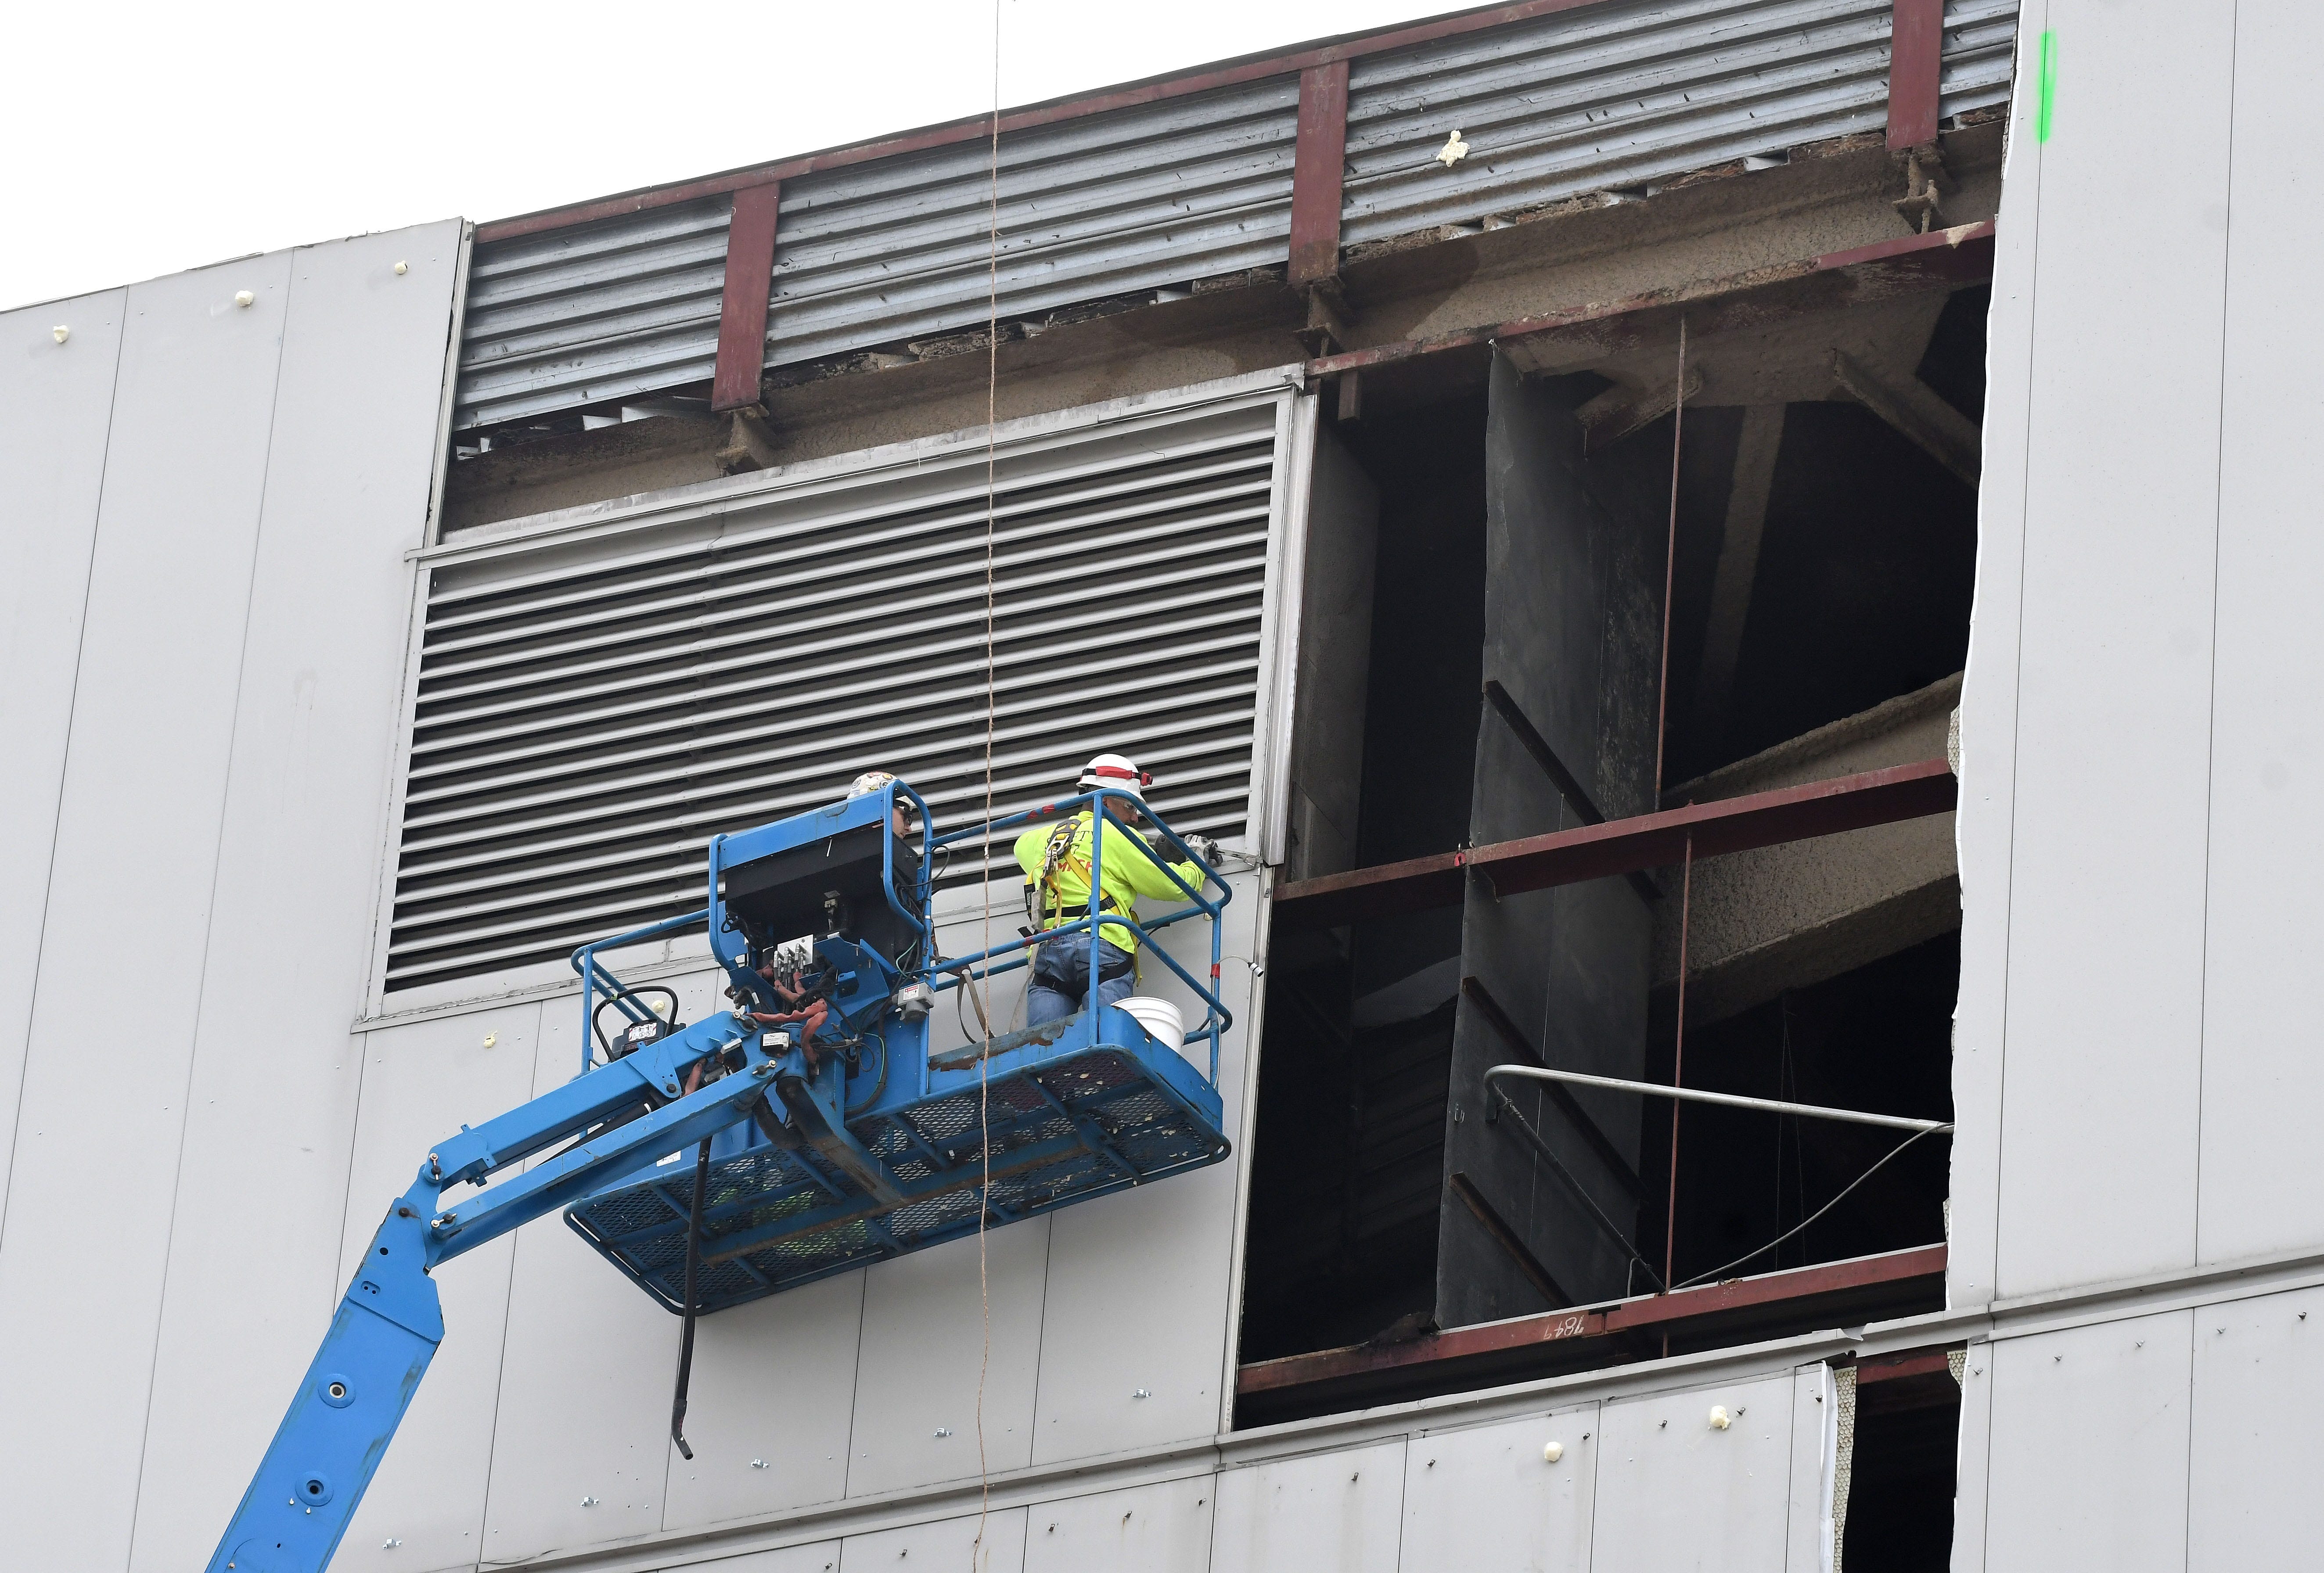 A contractor has started removing Joe Louis Arena's exterior metal panels as part of the stadium's demolition, which is expected to continue until late 2019 or early 2020.